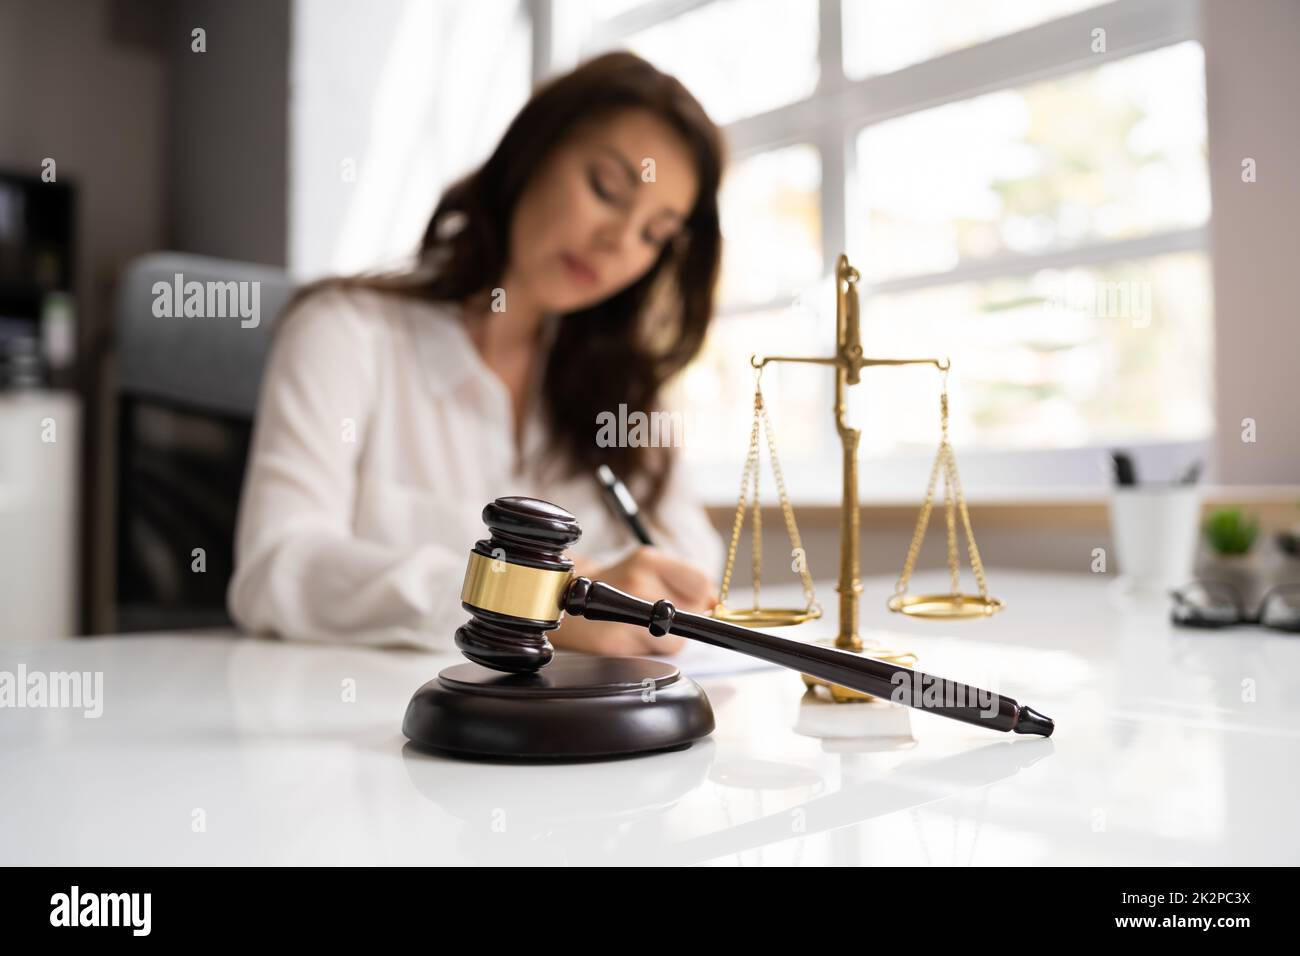 Female Lawyer In Courtroom Stock Photo